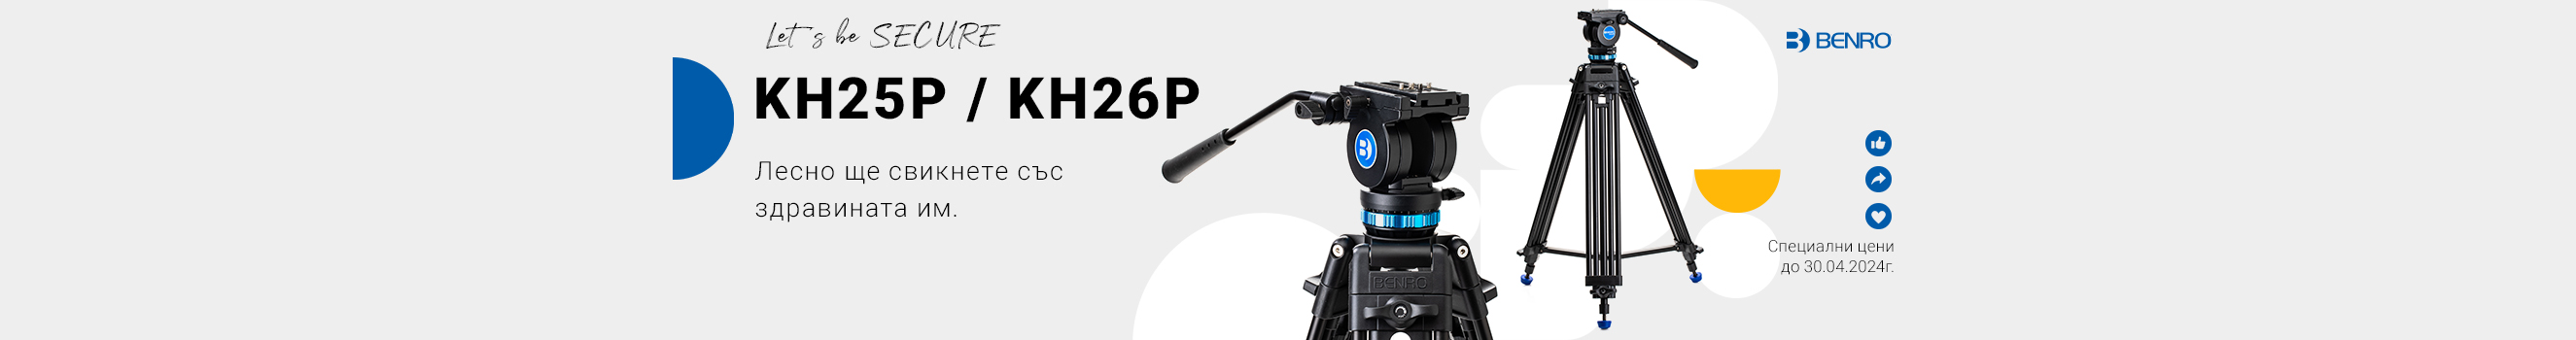  Get a new tripod Benro at a great price until 30.04.